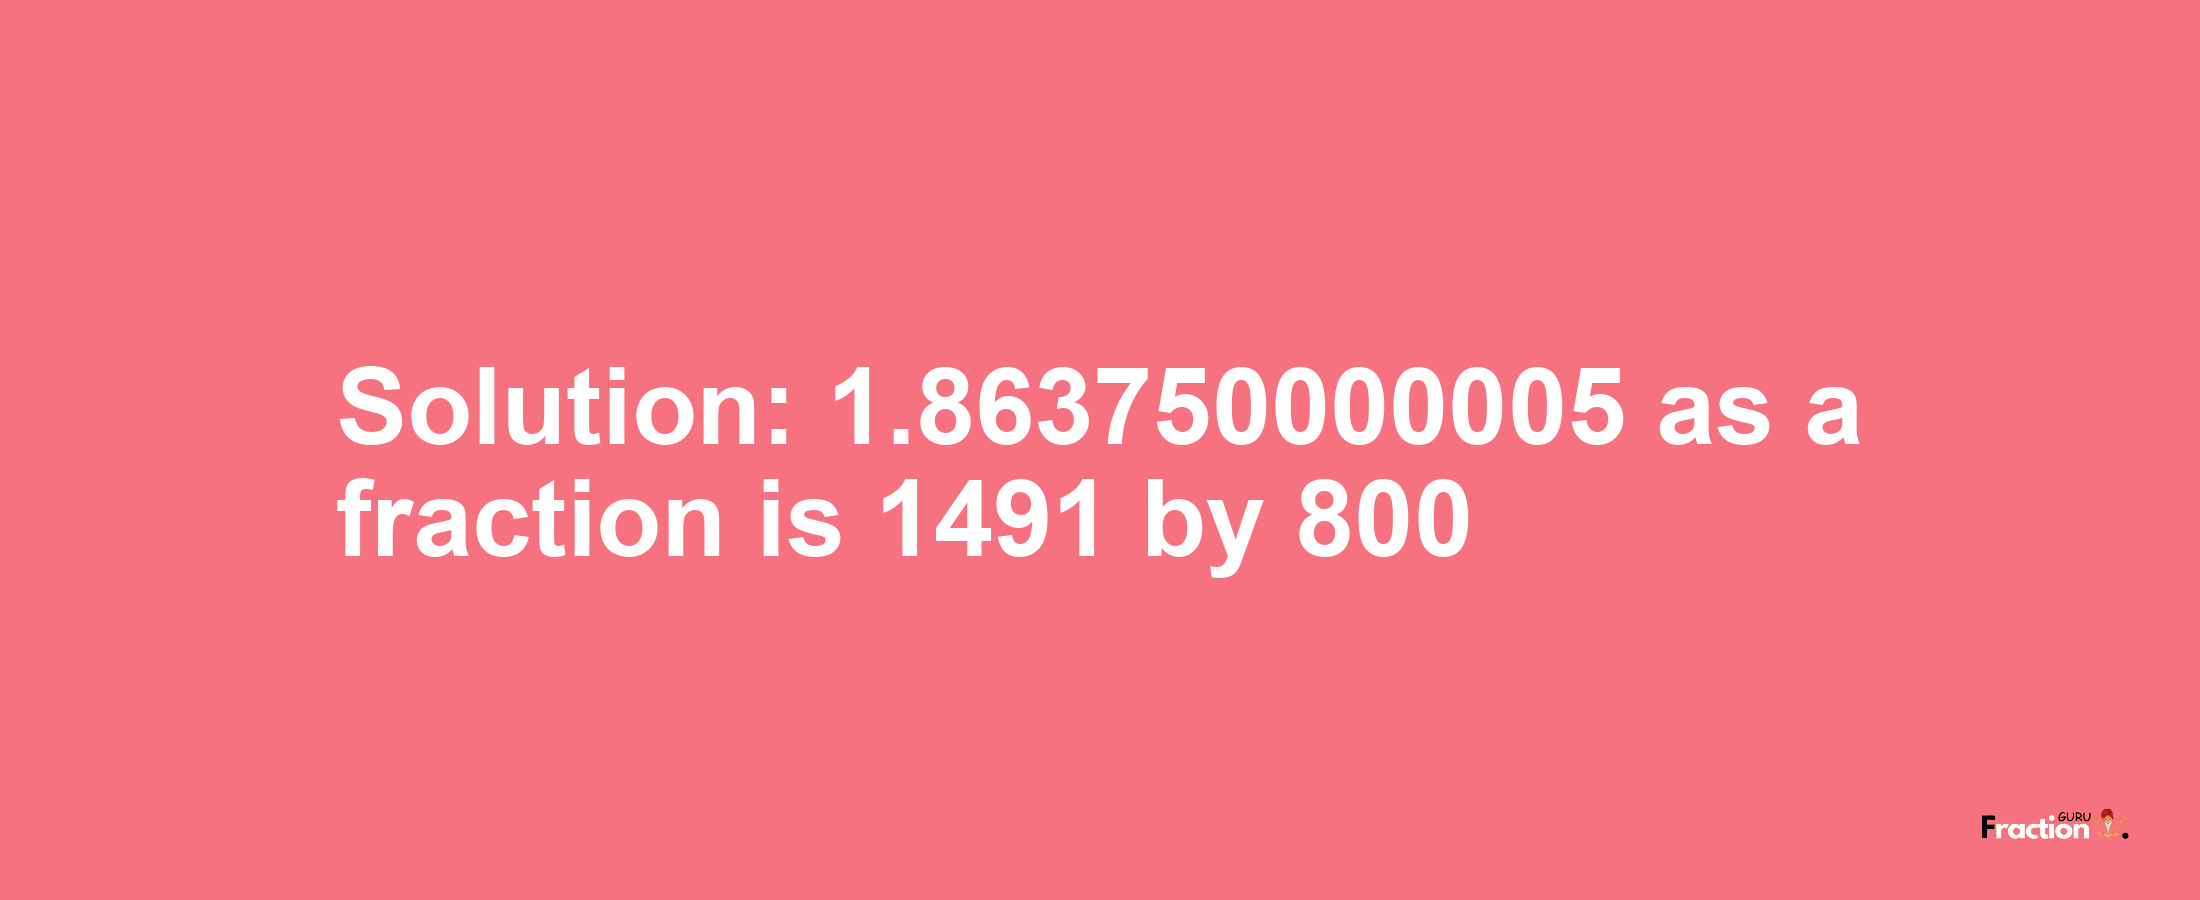 Solution:1.863750000005 as a fraction is 1491/800